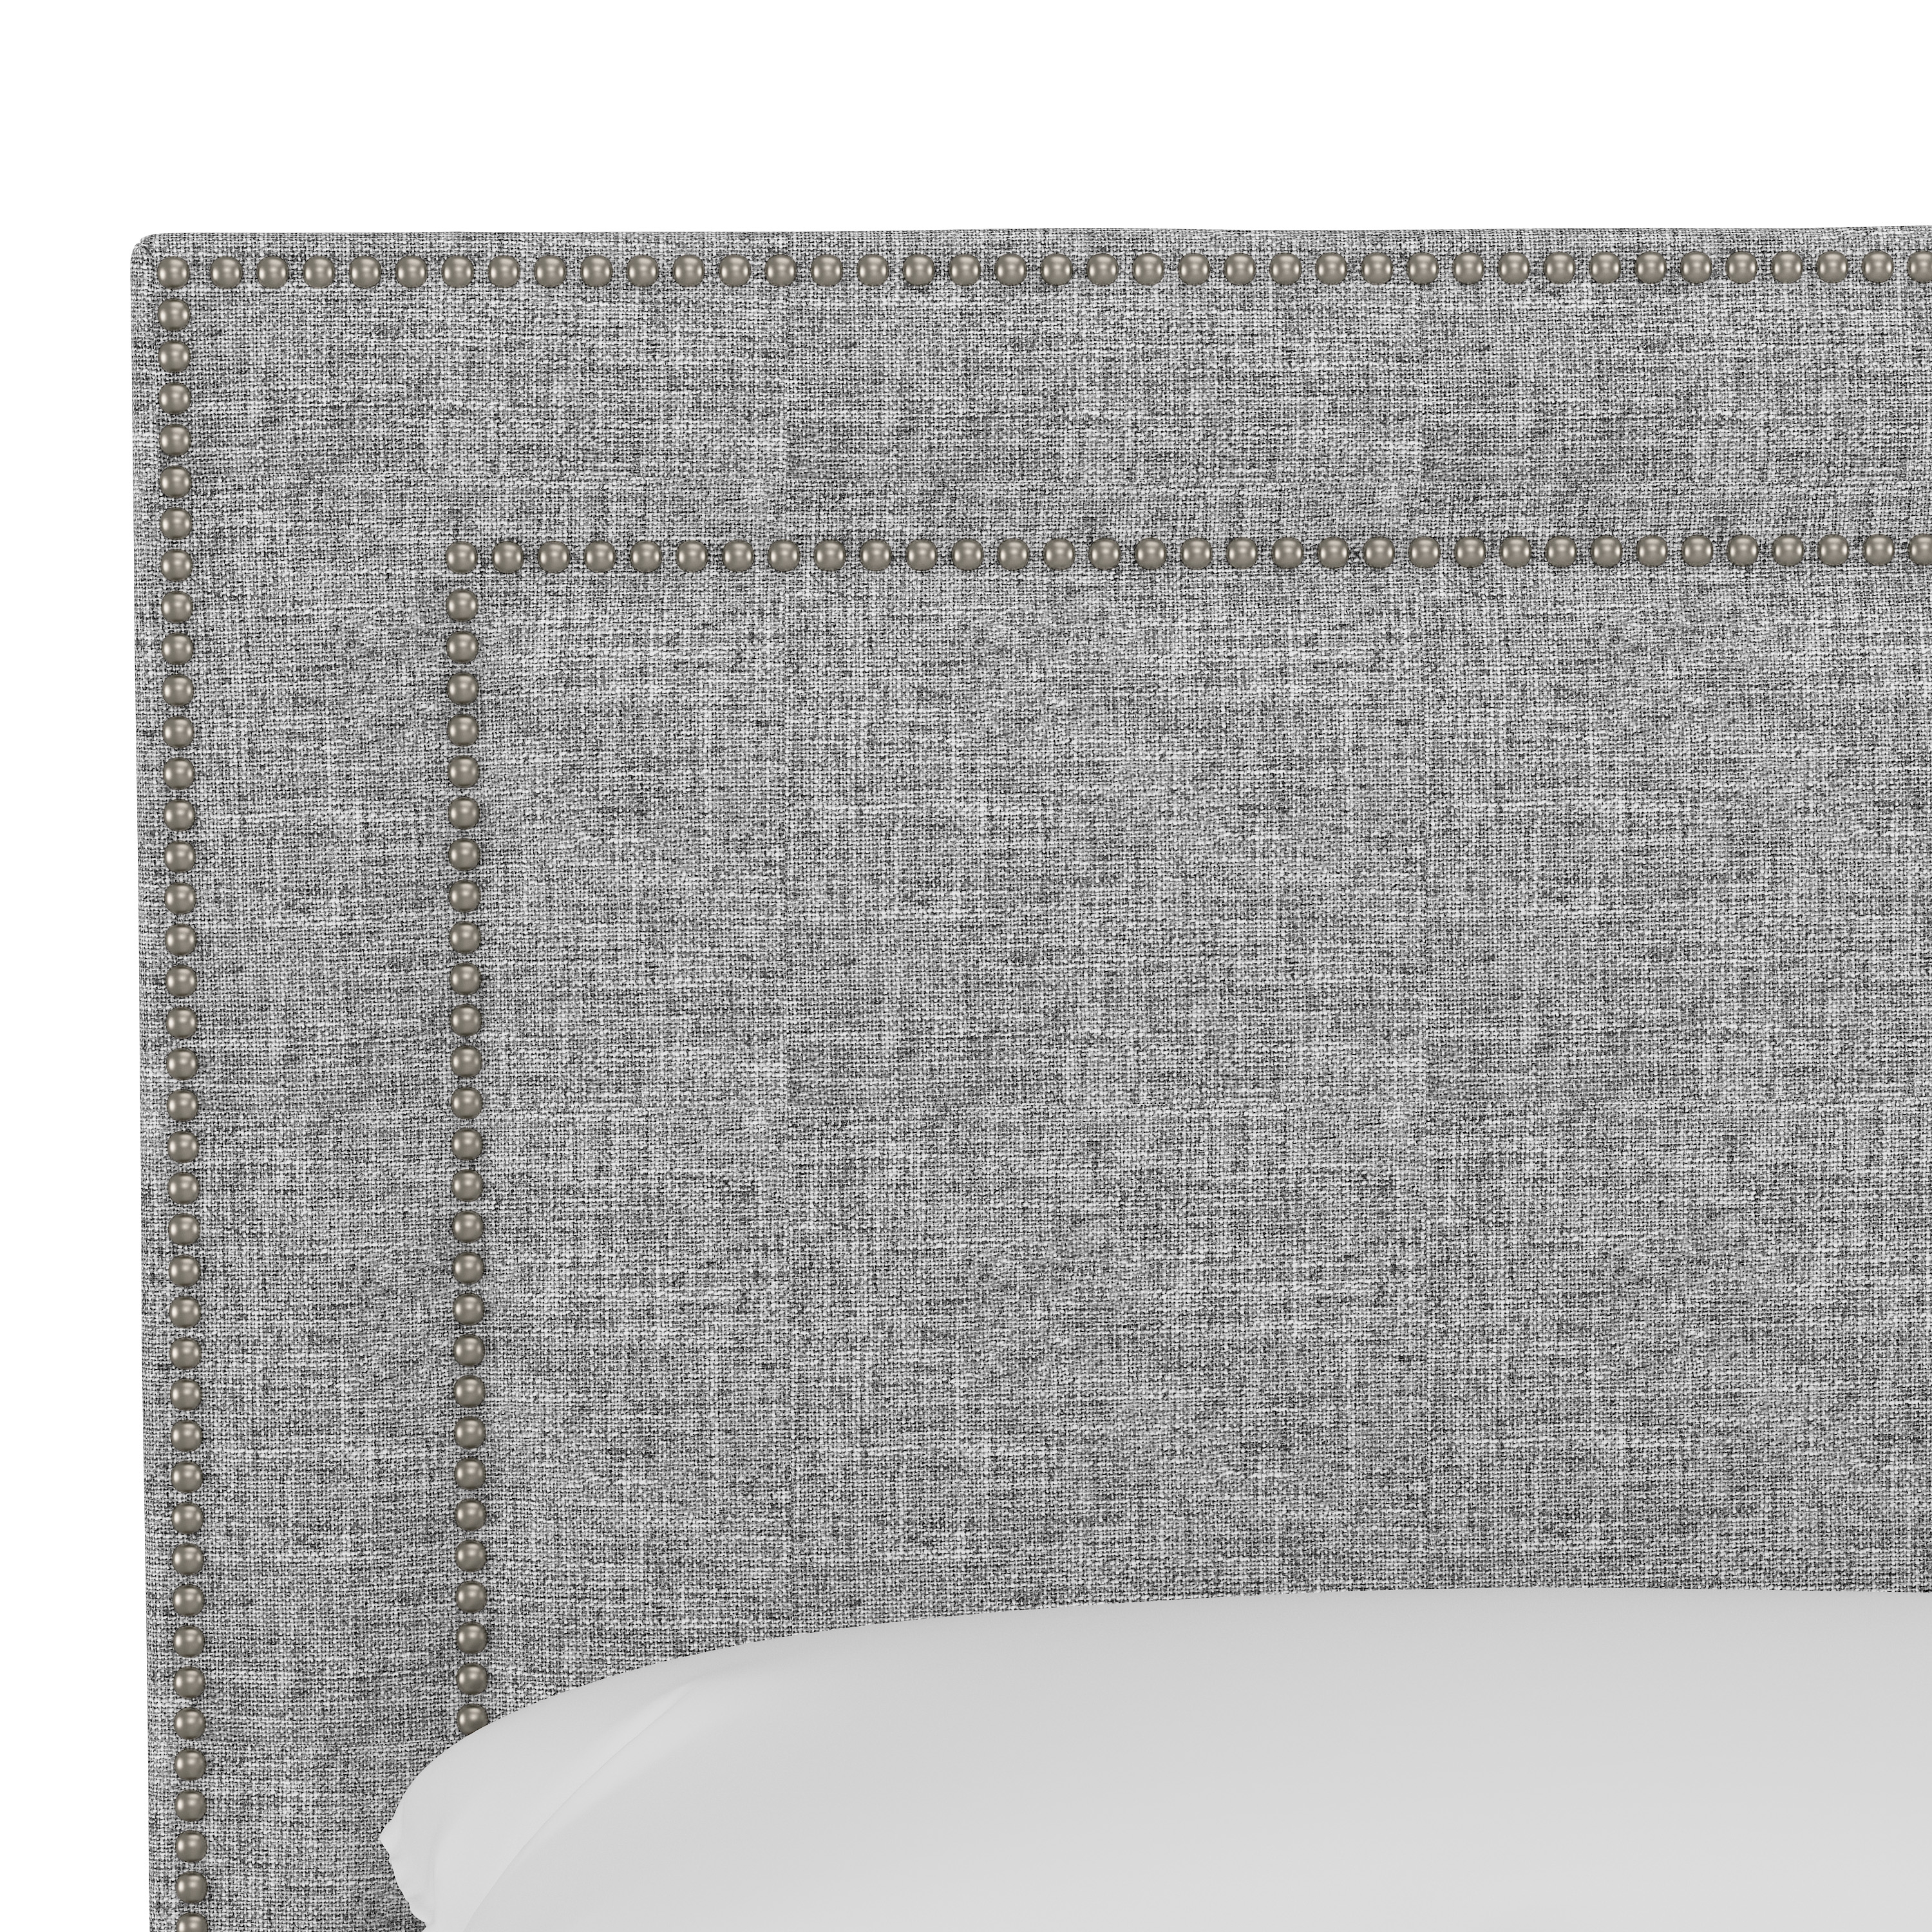 Williams Headboard, Queen, Pumice, Pewter Nailheads - Image 3